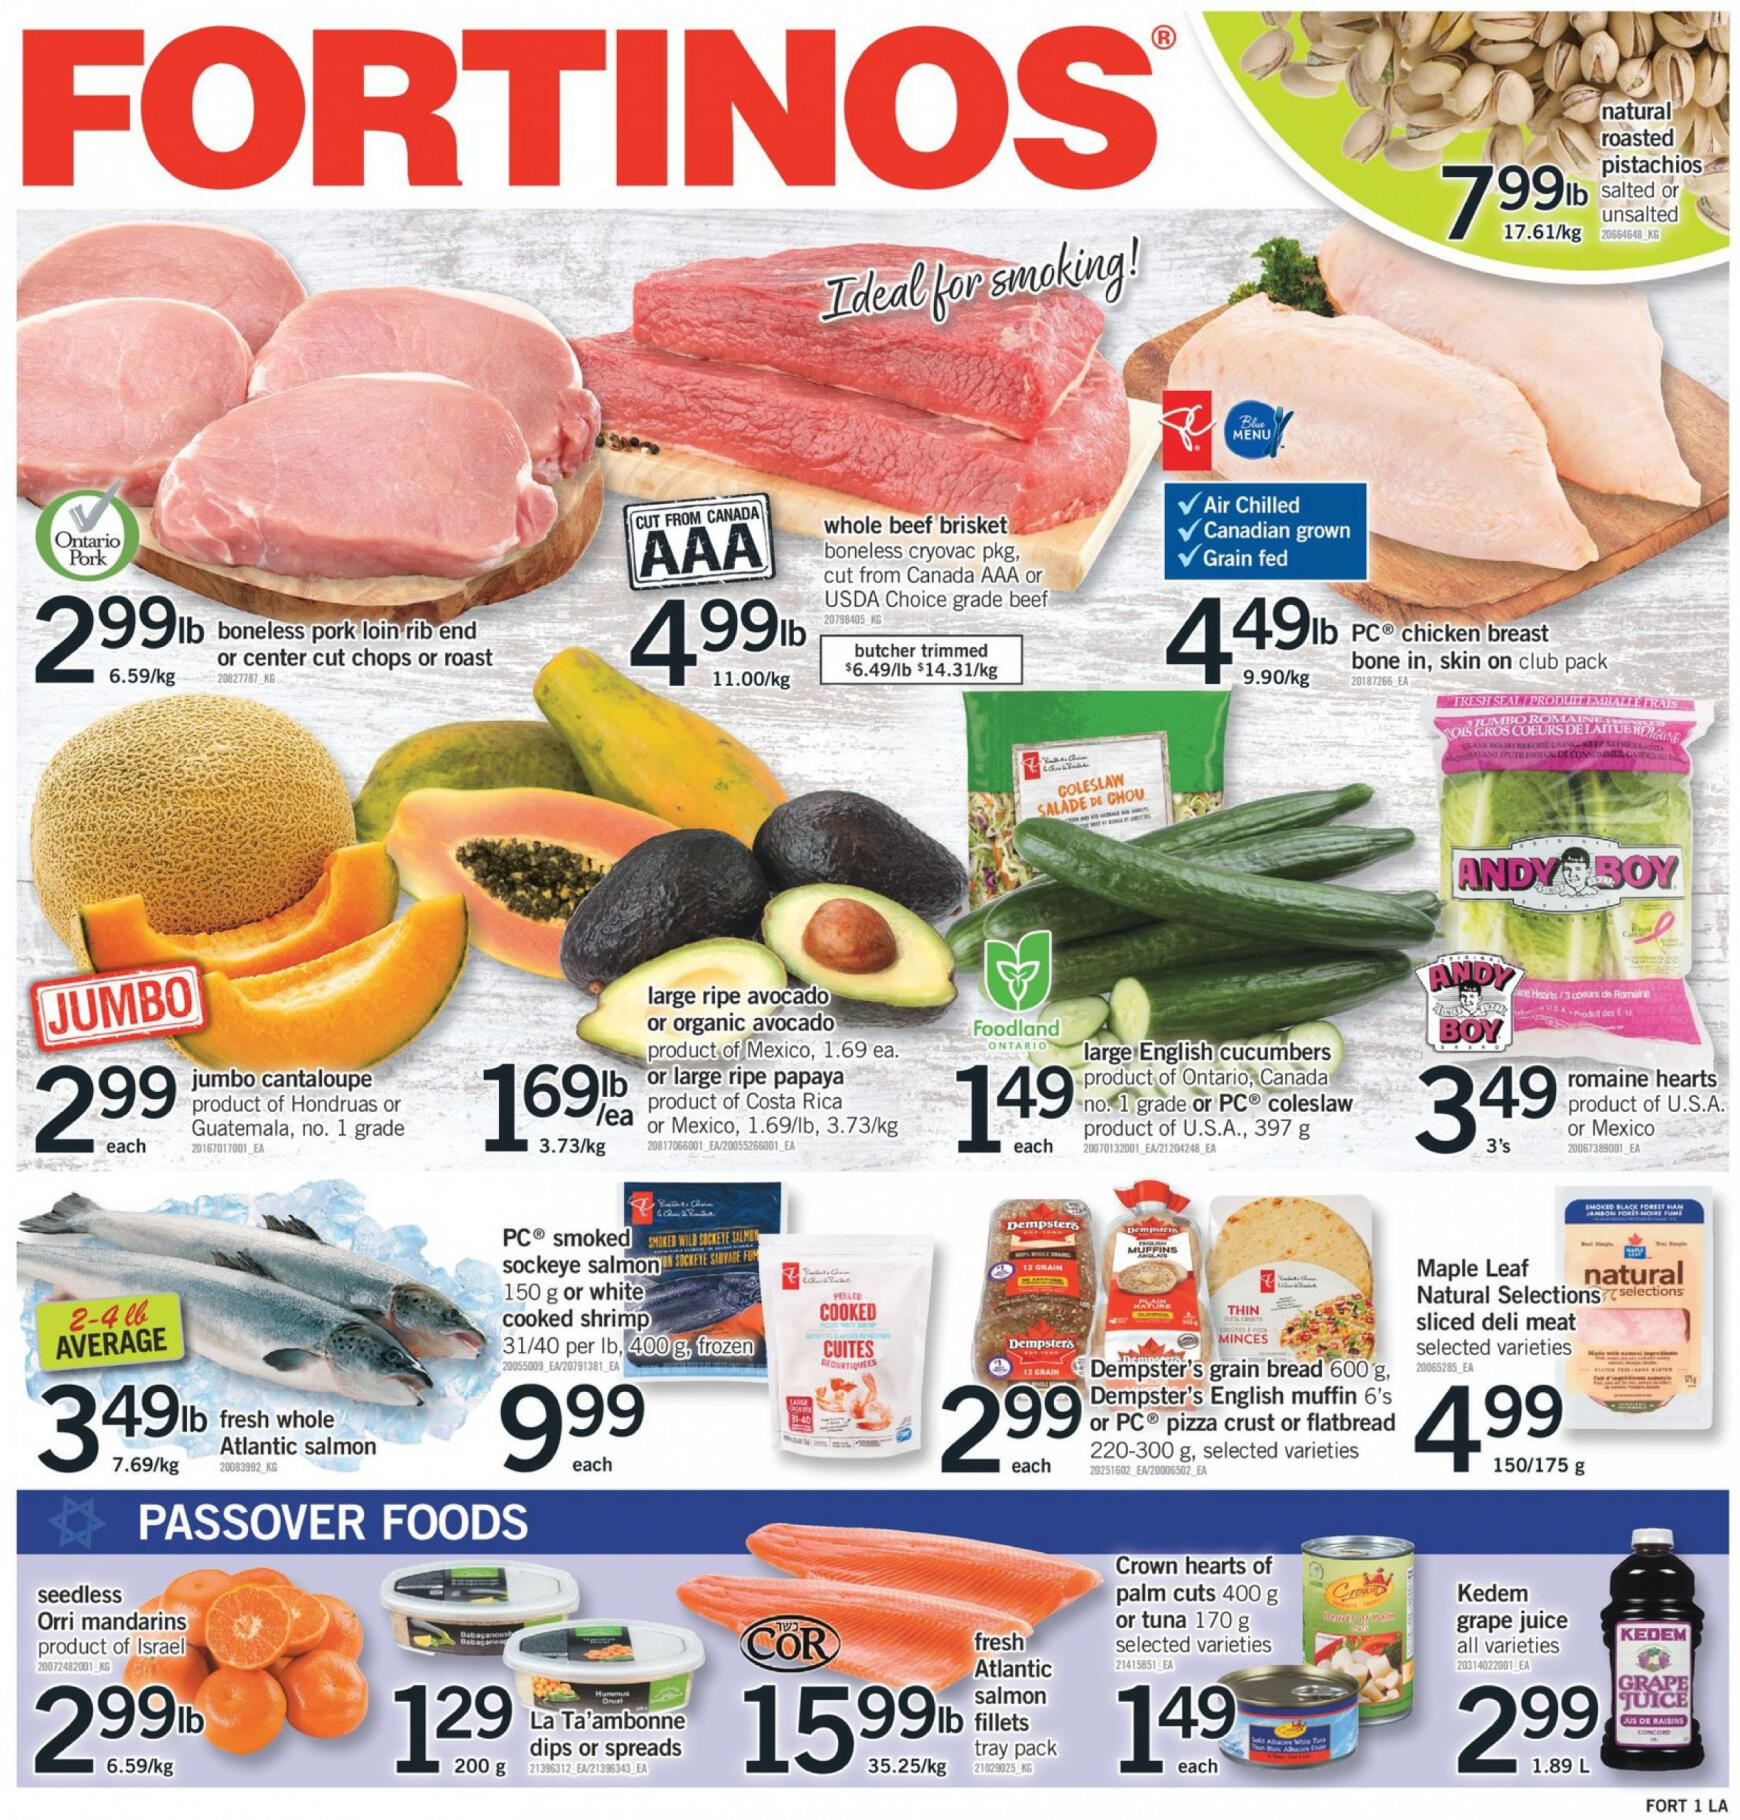 fortinos - Fortinos flyer current 18.04. - 24.04.